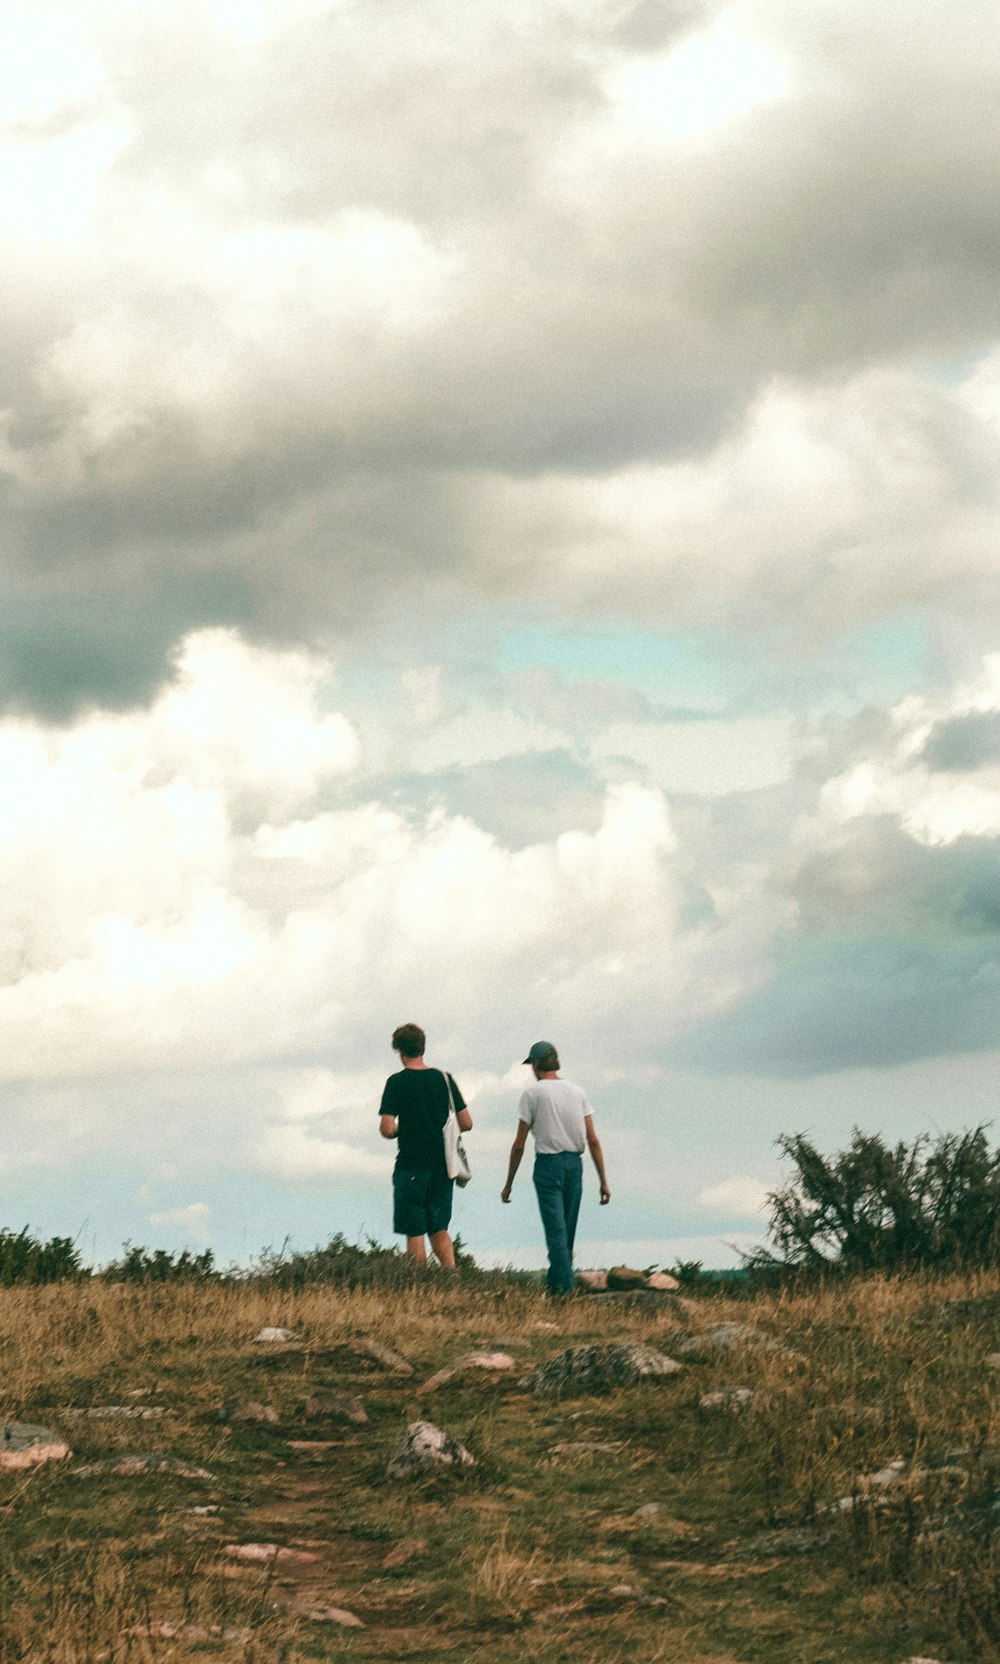 man and woman walking on brown grass field under white clouds during daytime